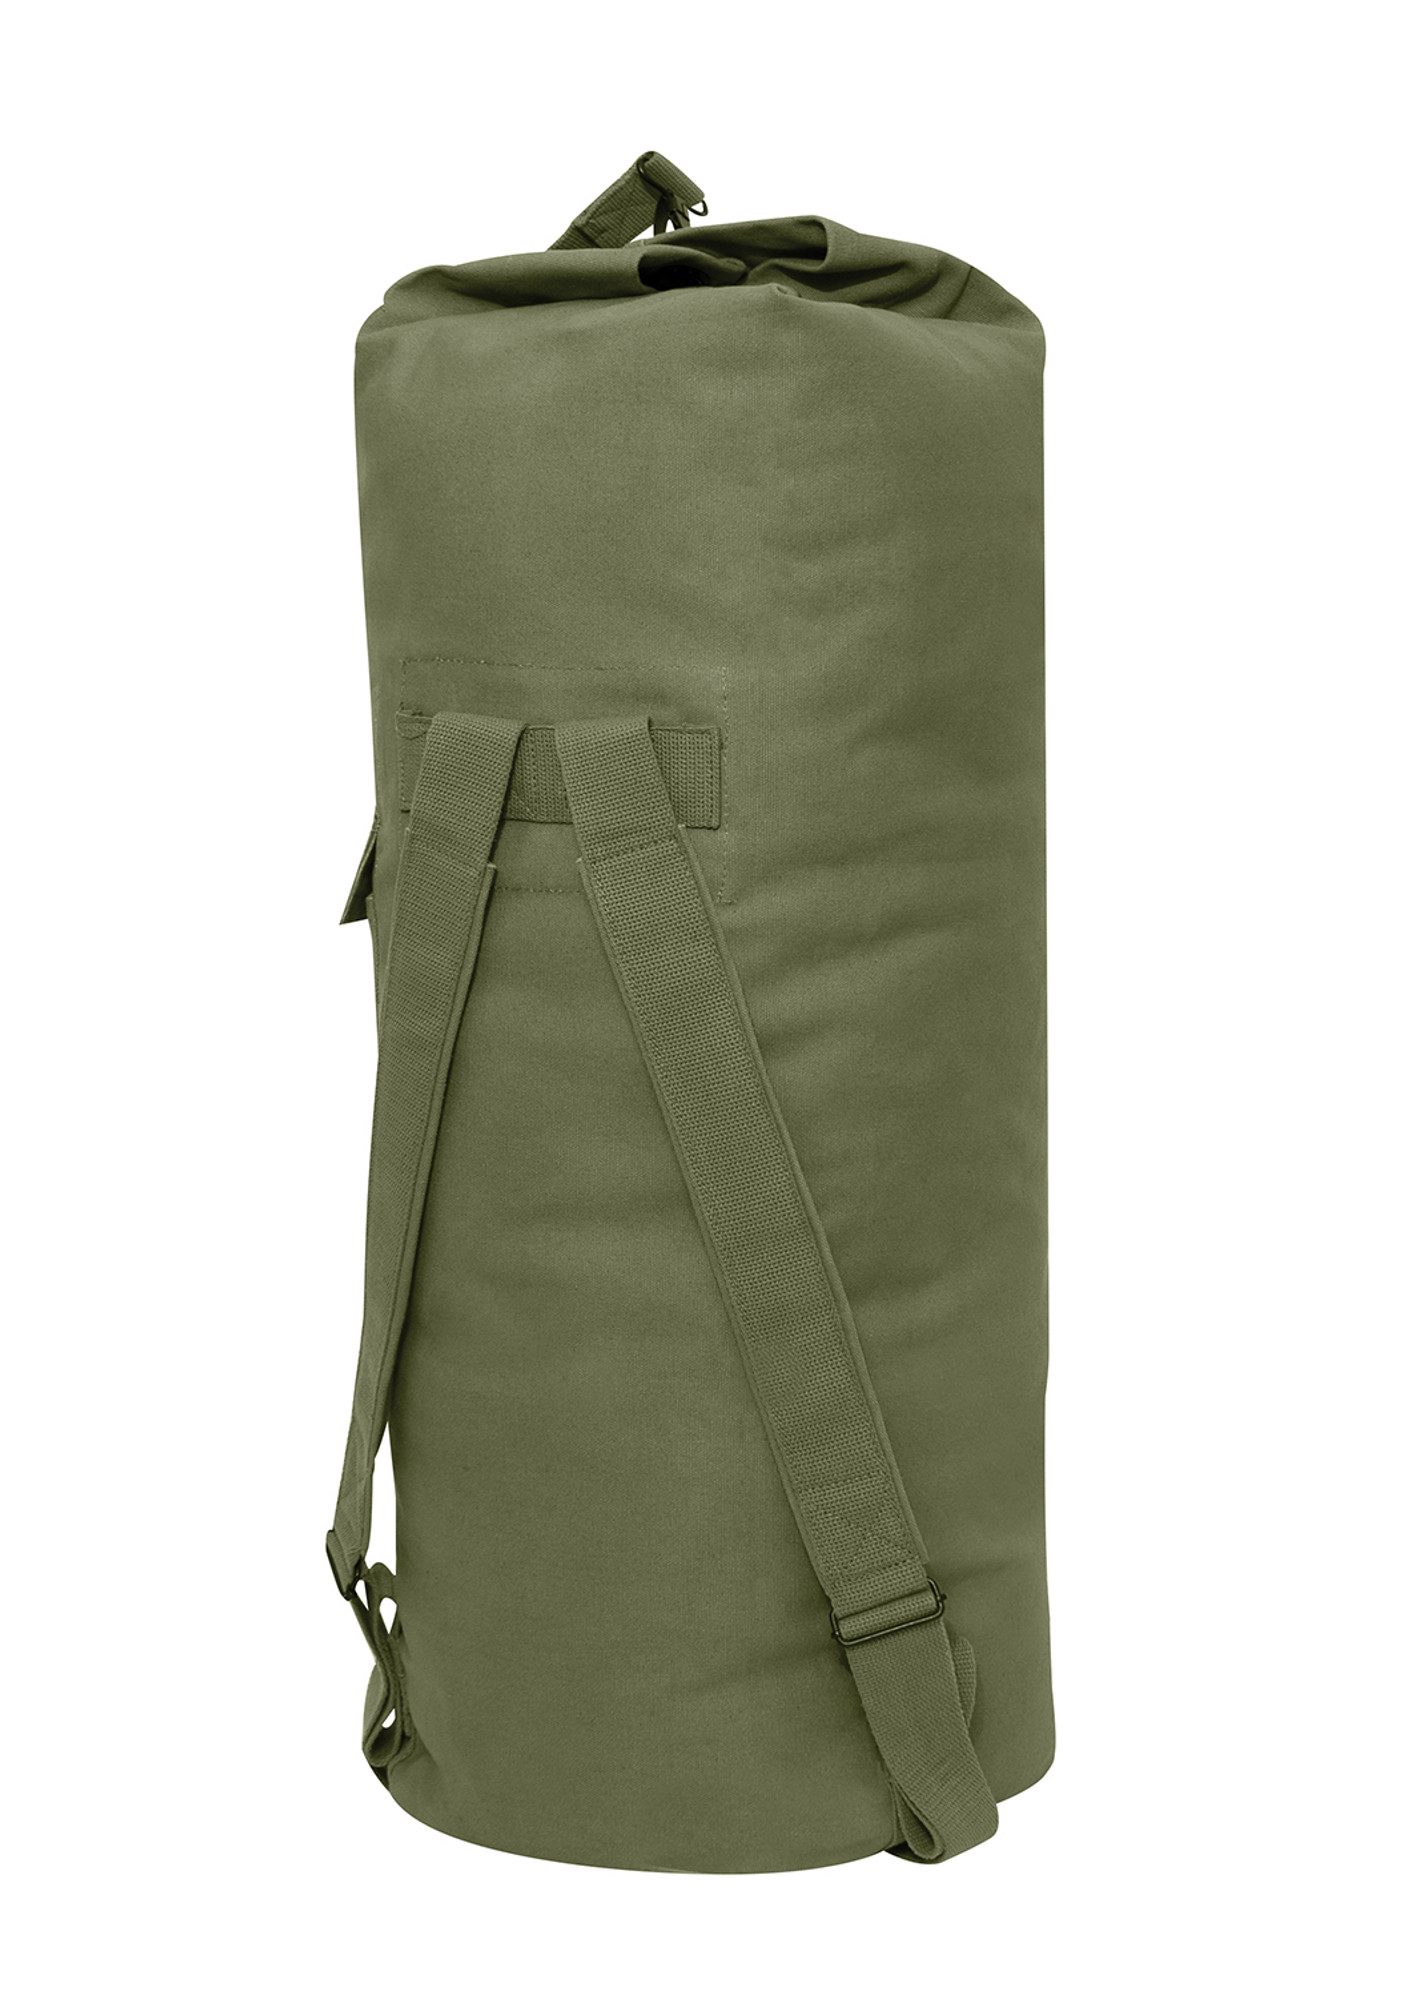 G.I. Type Double-Strap Duffle Bag - Olive Drab